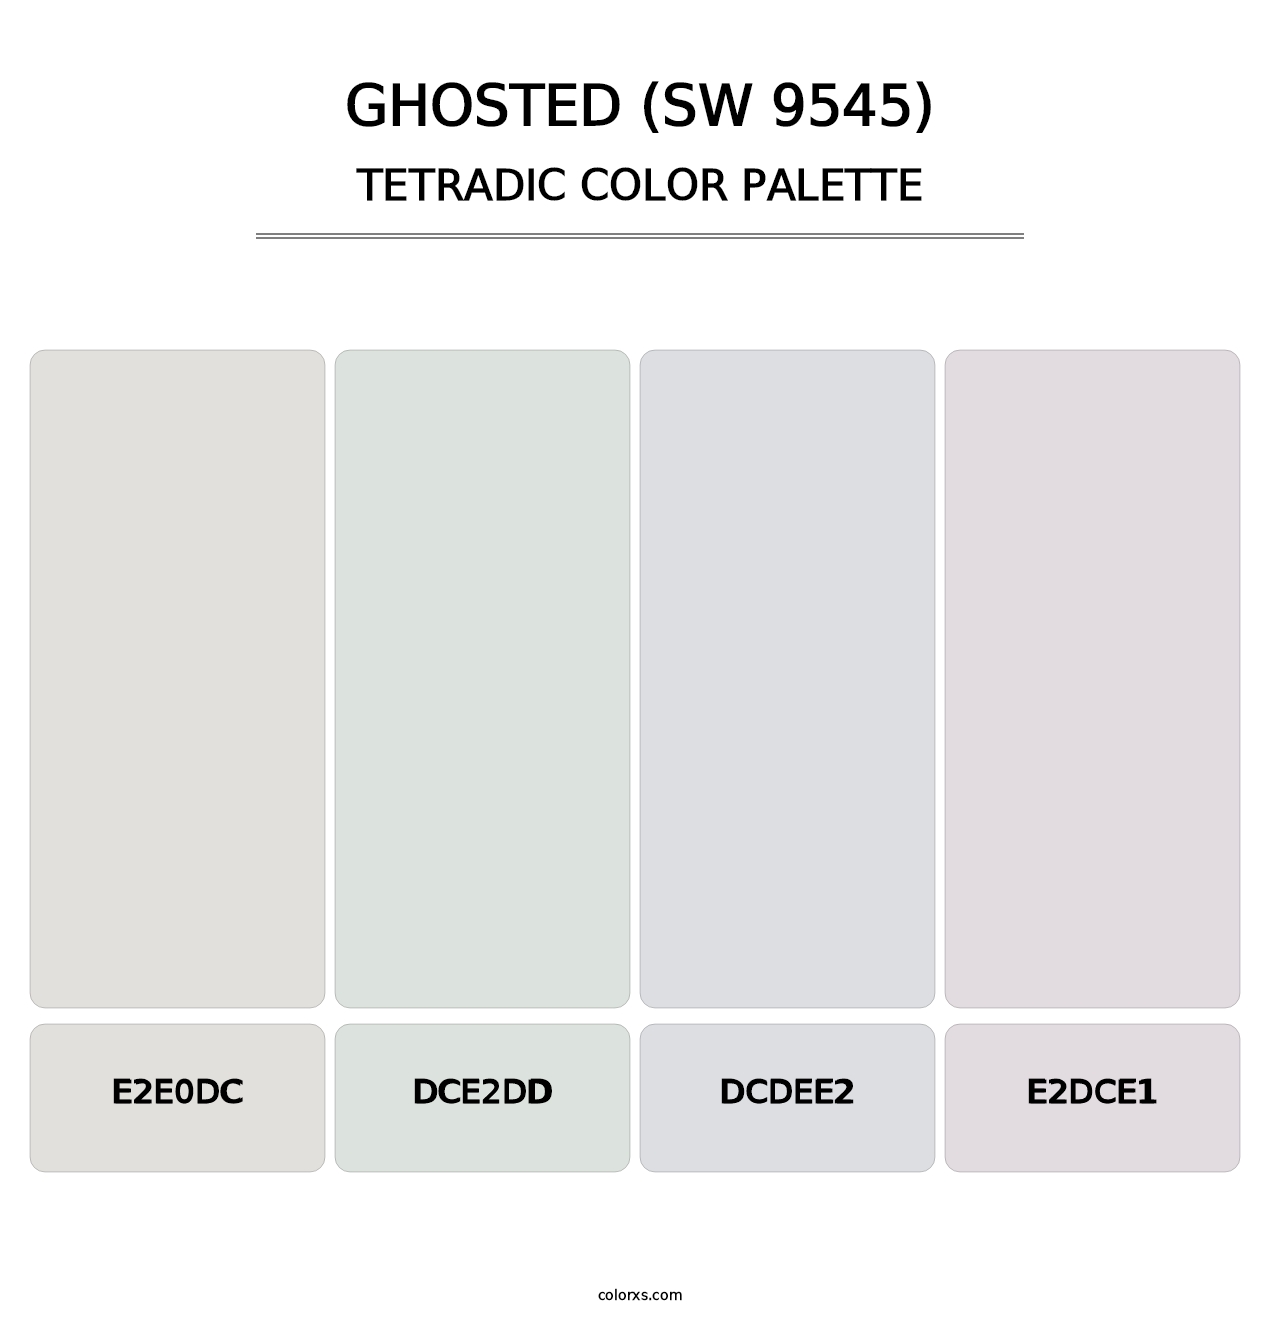 Ghosted (SW 9545) - Tetradic Color Palette